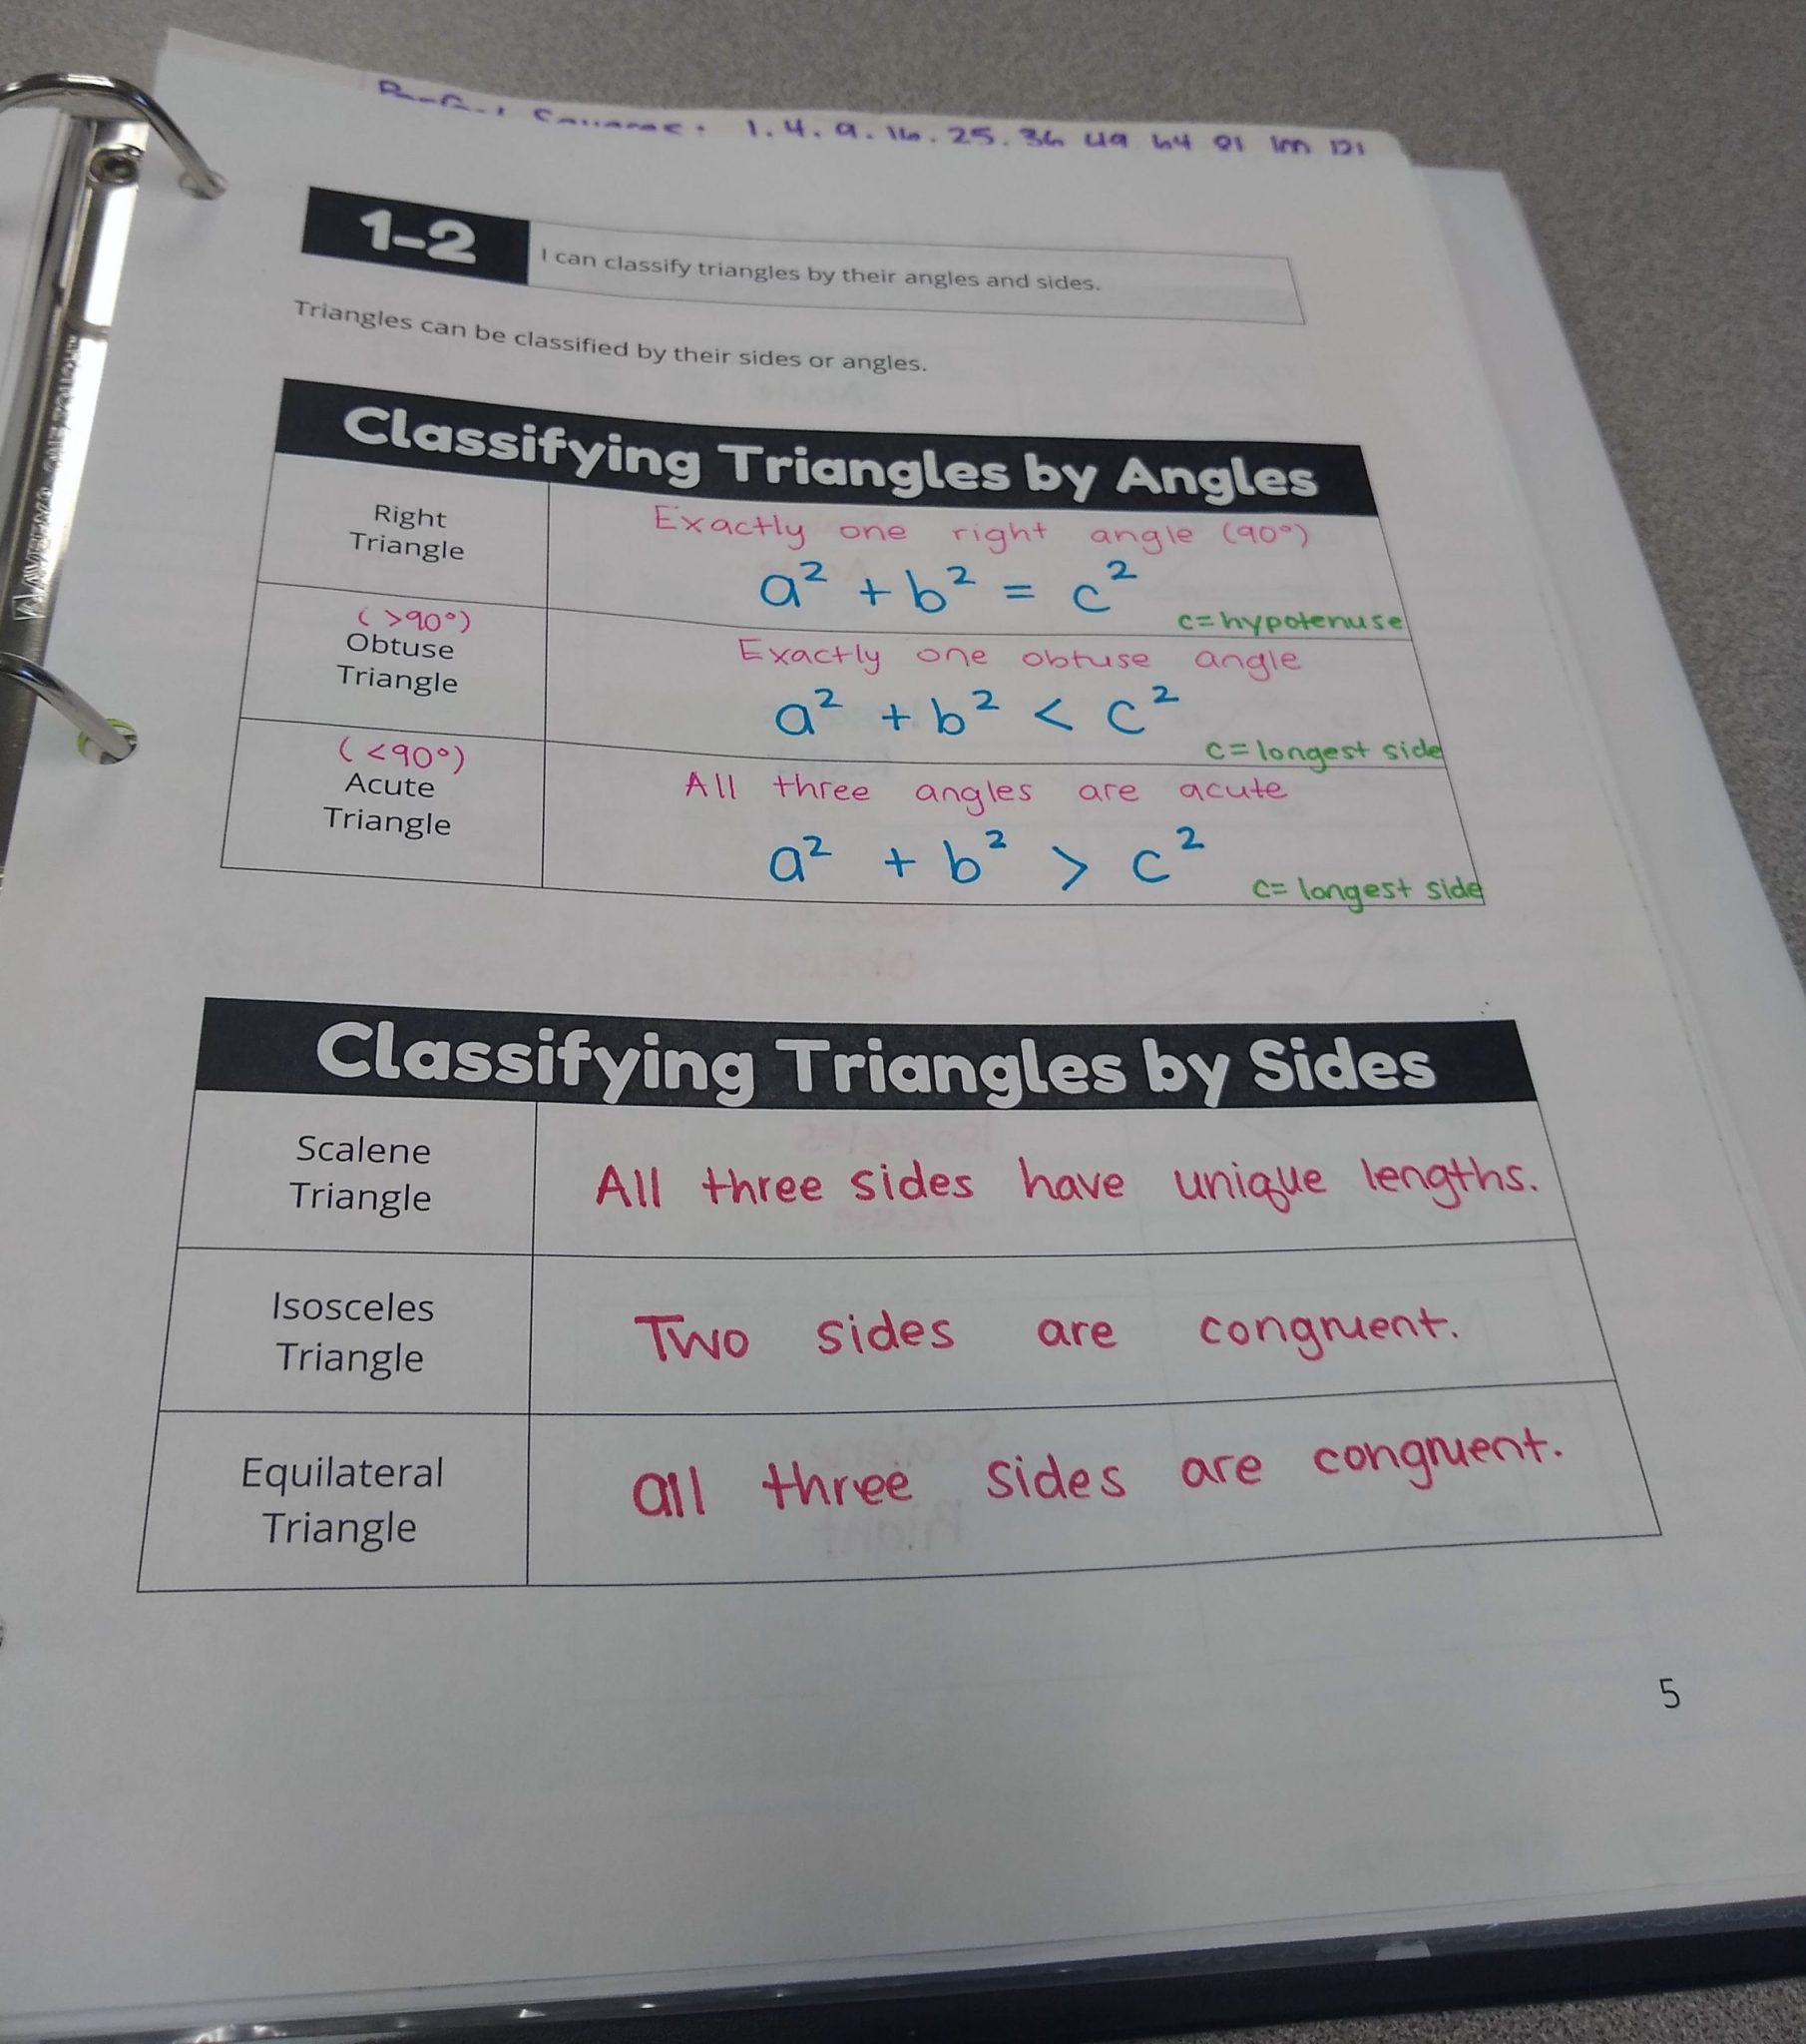 Classifying Triangles By Angles And Sides Notes Math Love 3921